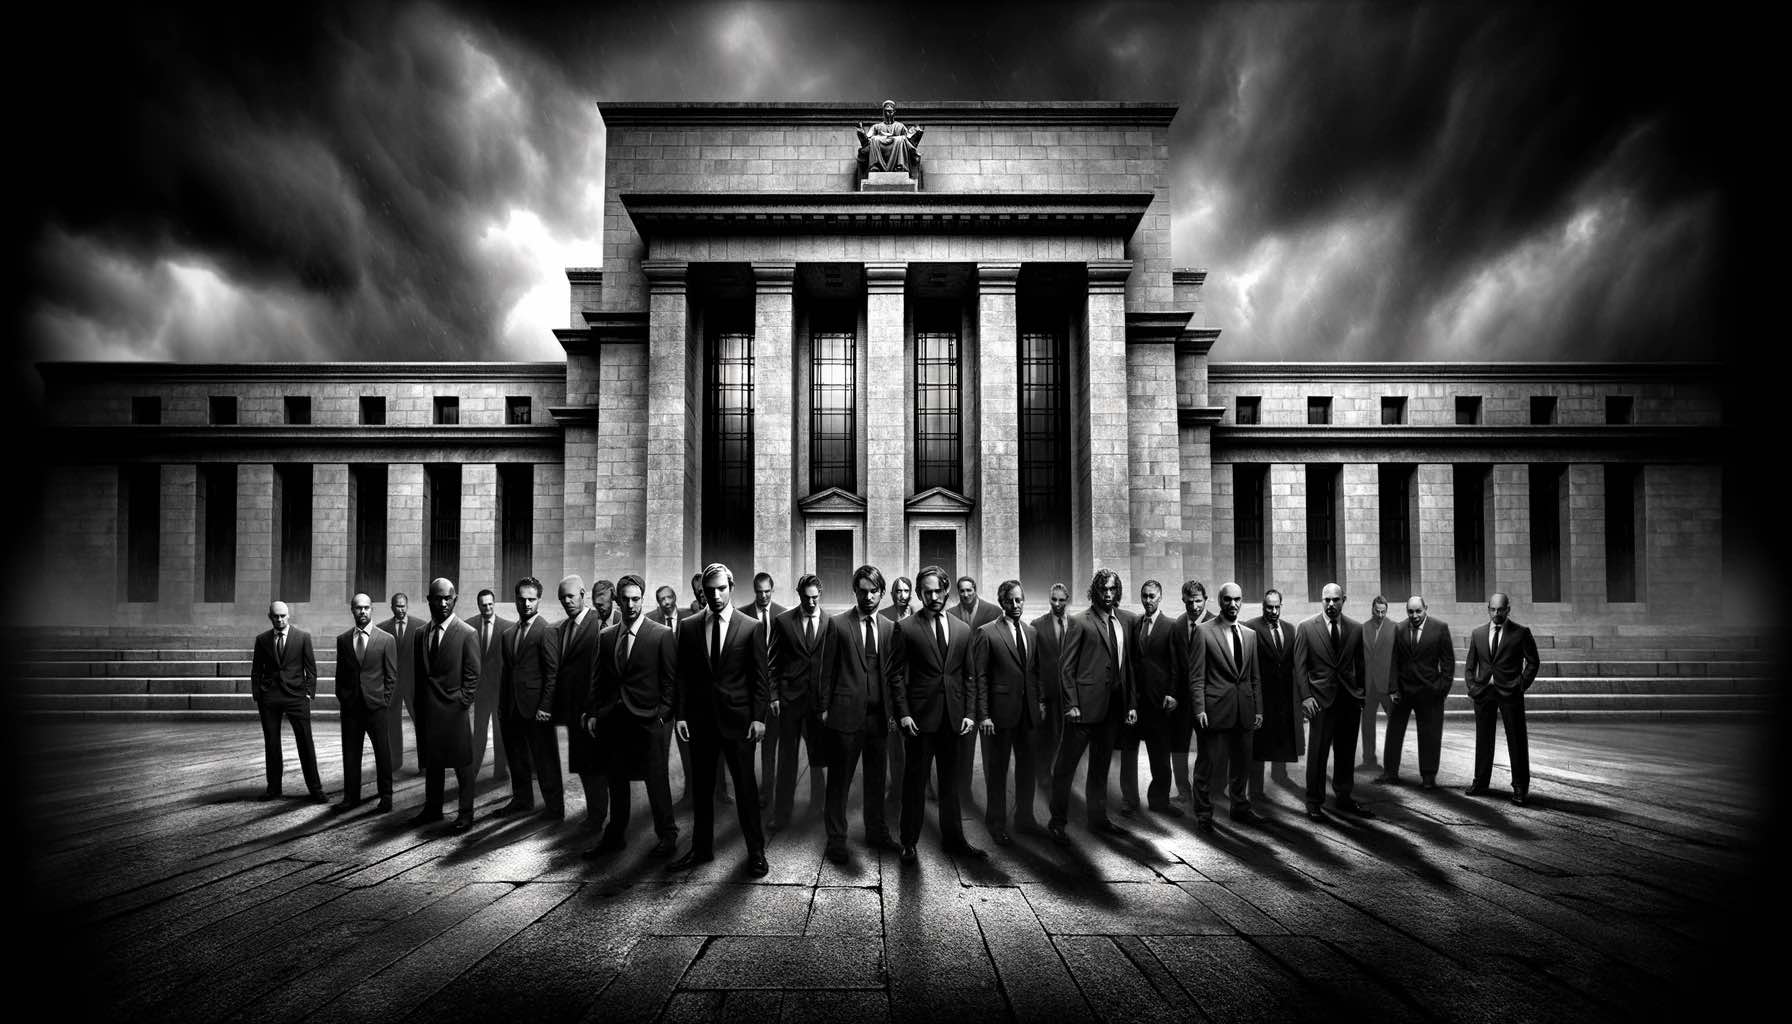 Central bankers talk the talk, but fail to walk the walk